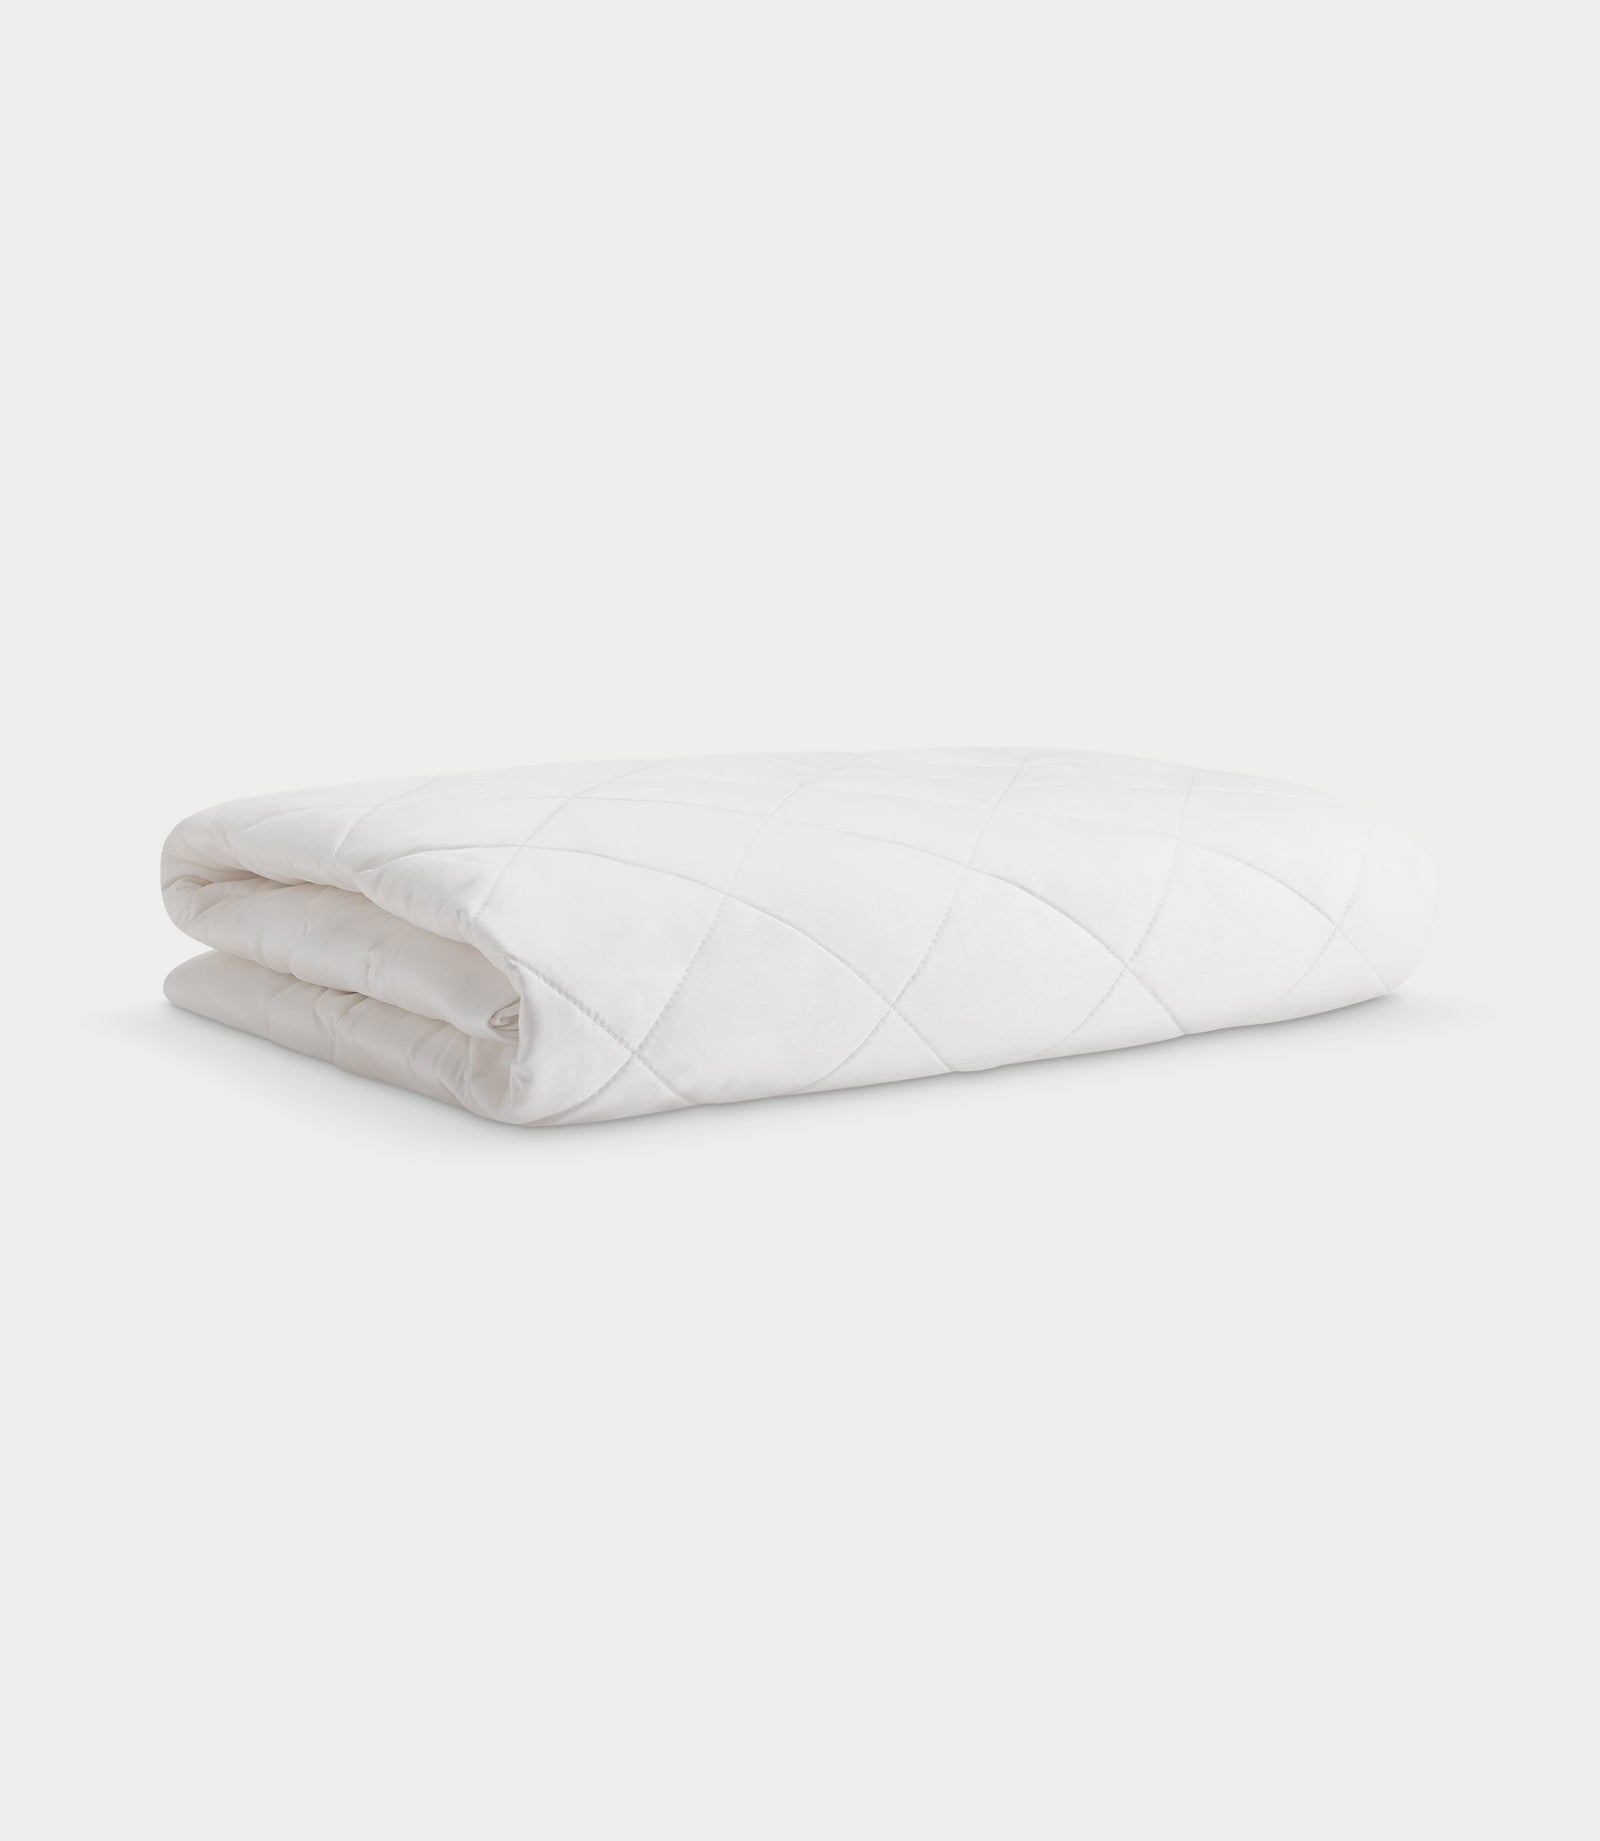 Mattress pad folded with white background